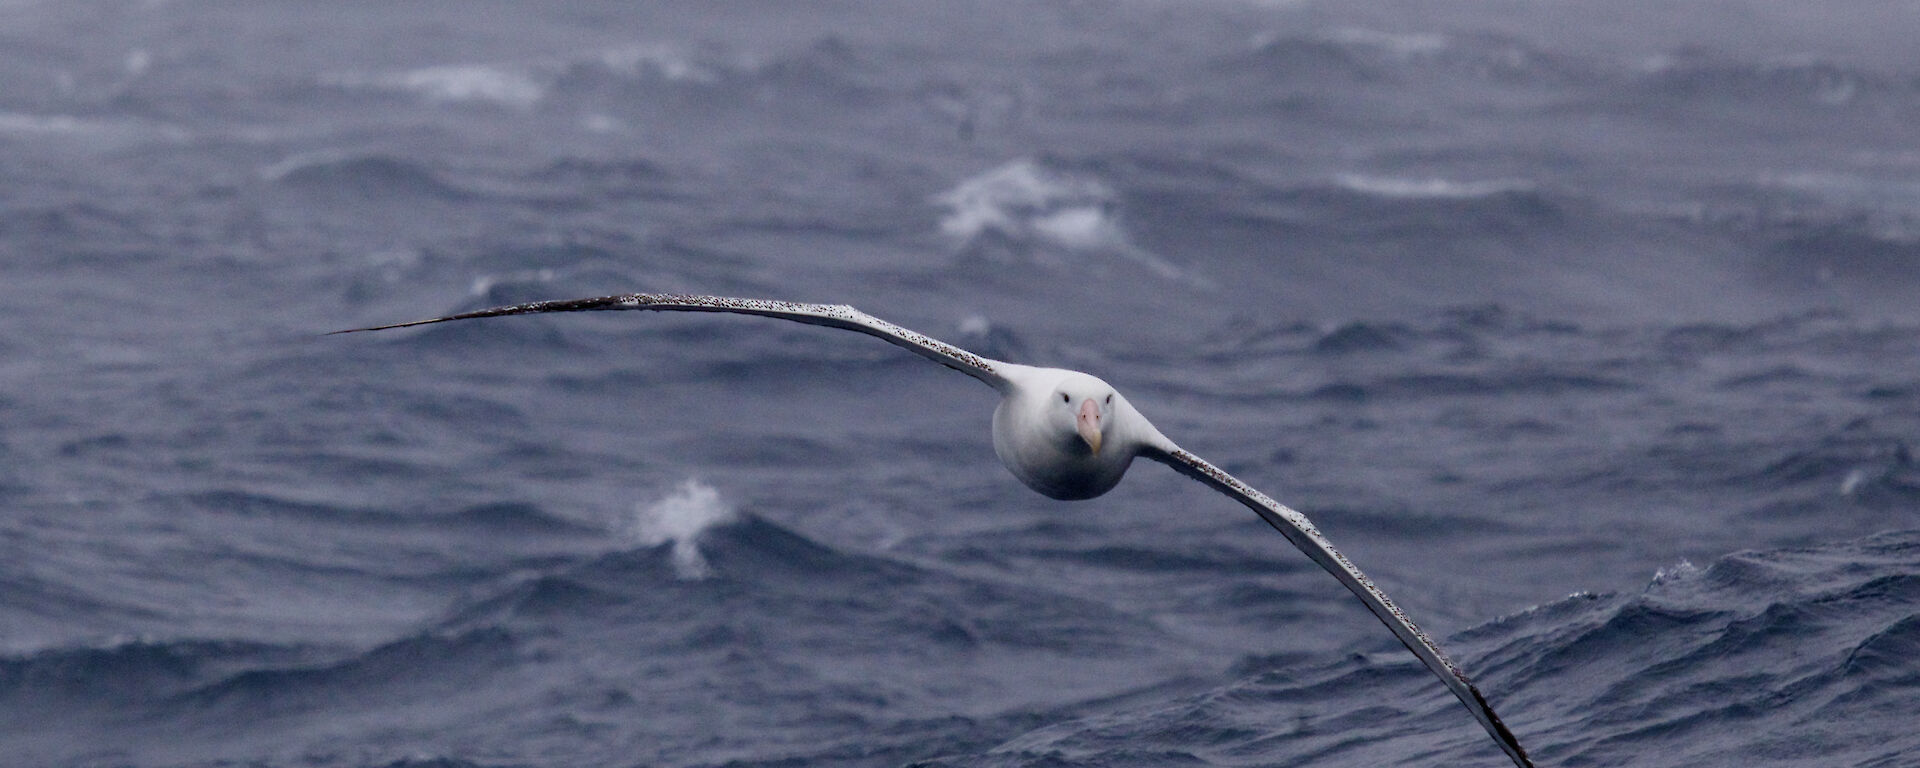 A wandering albatross flying above the Southern Ocean waves.